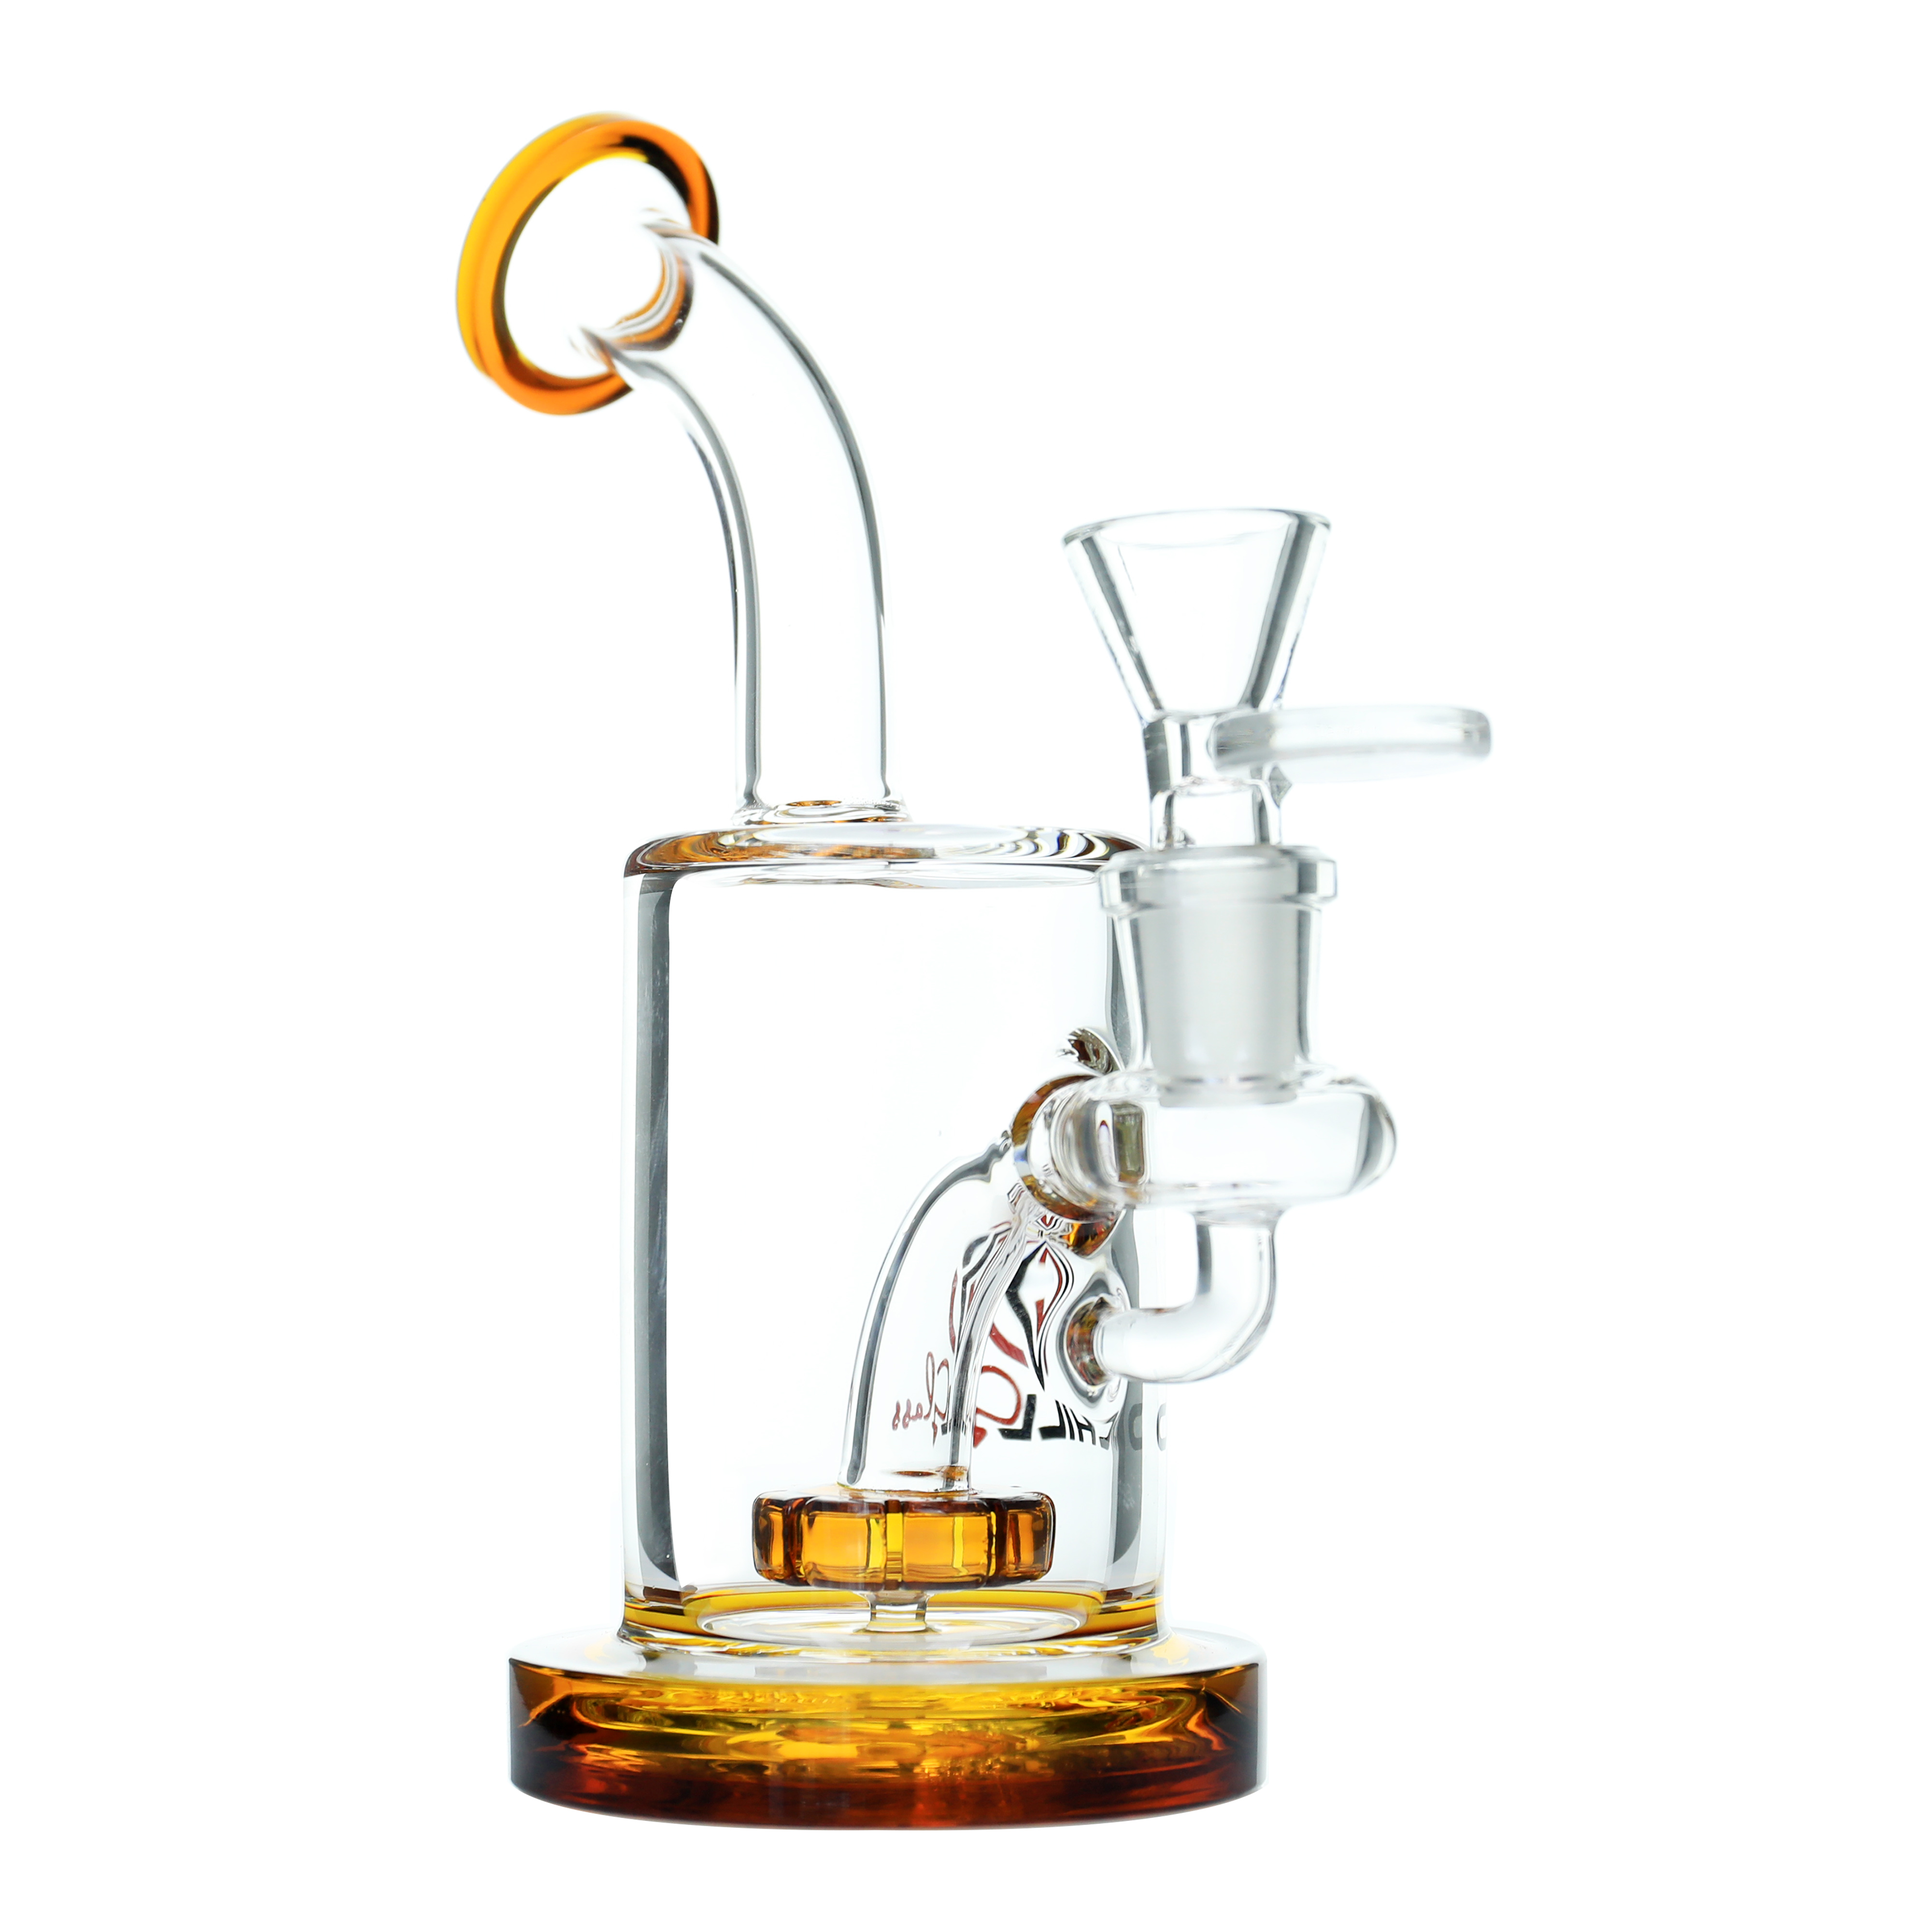 Chill-Glass-Water-Pipe-JLE-139